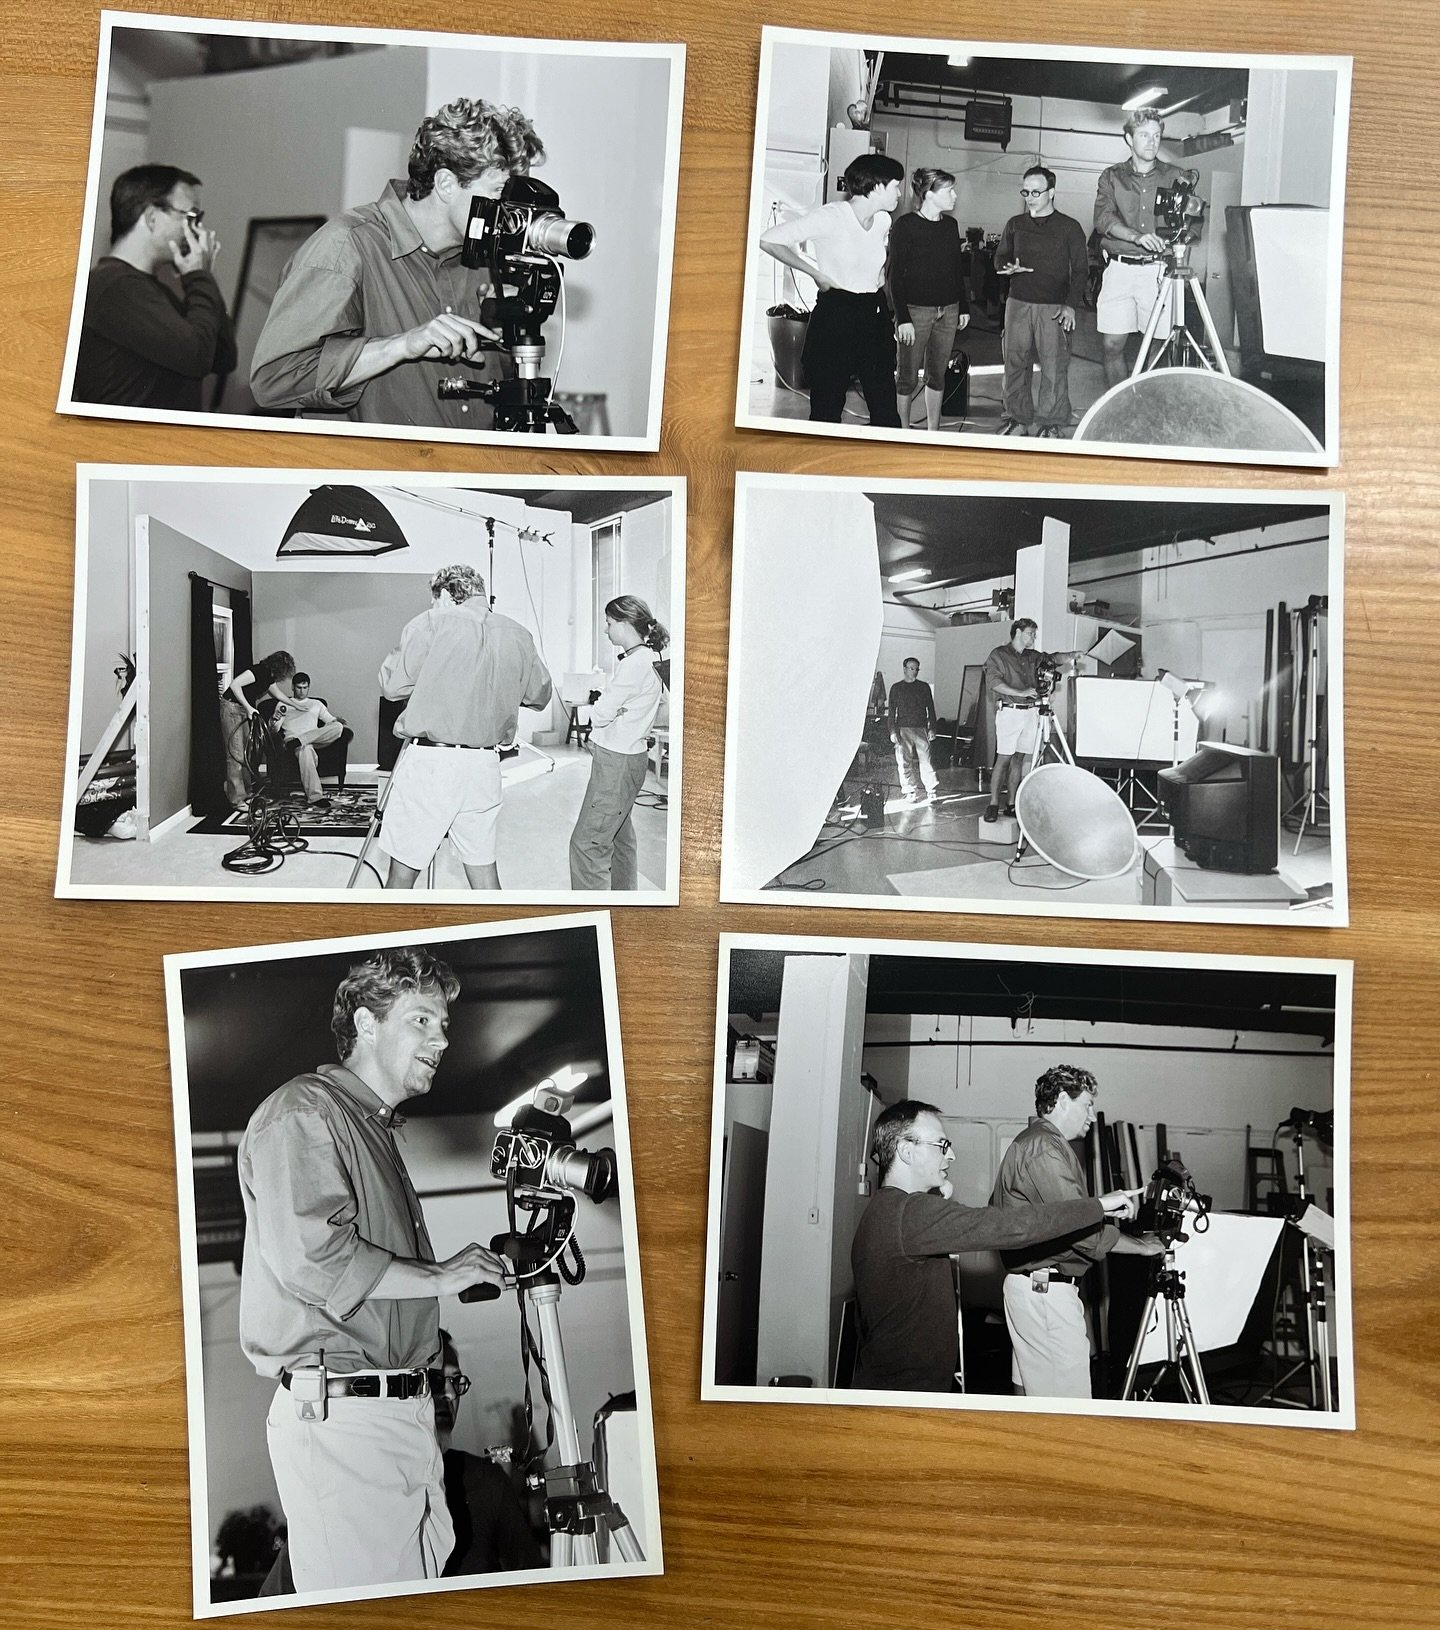 Blast from the past&hellip; just found these amazing prints from a shoot back in Sept 2001. This was for a Bell Aliant campaign with Cossette Atlantic. Paul Douglas was the Creative Director and Cindy Douglas was the set designer&hellip; great memori